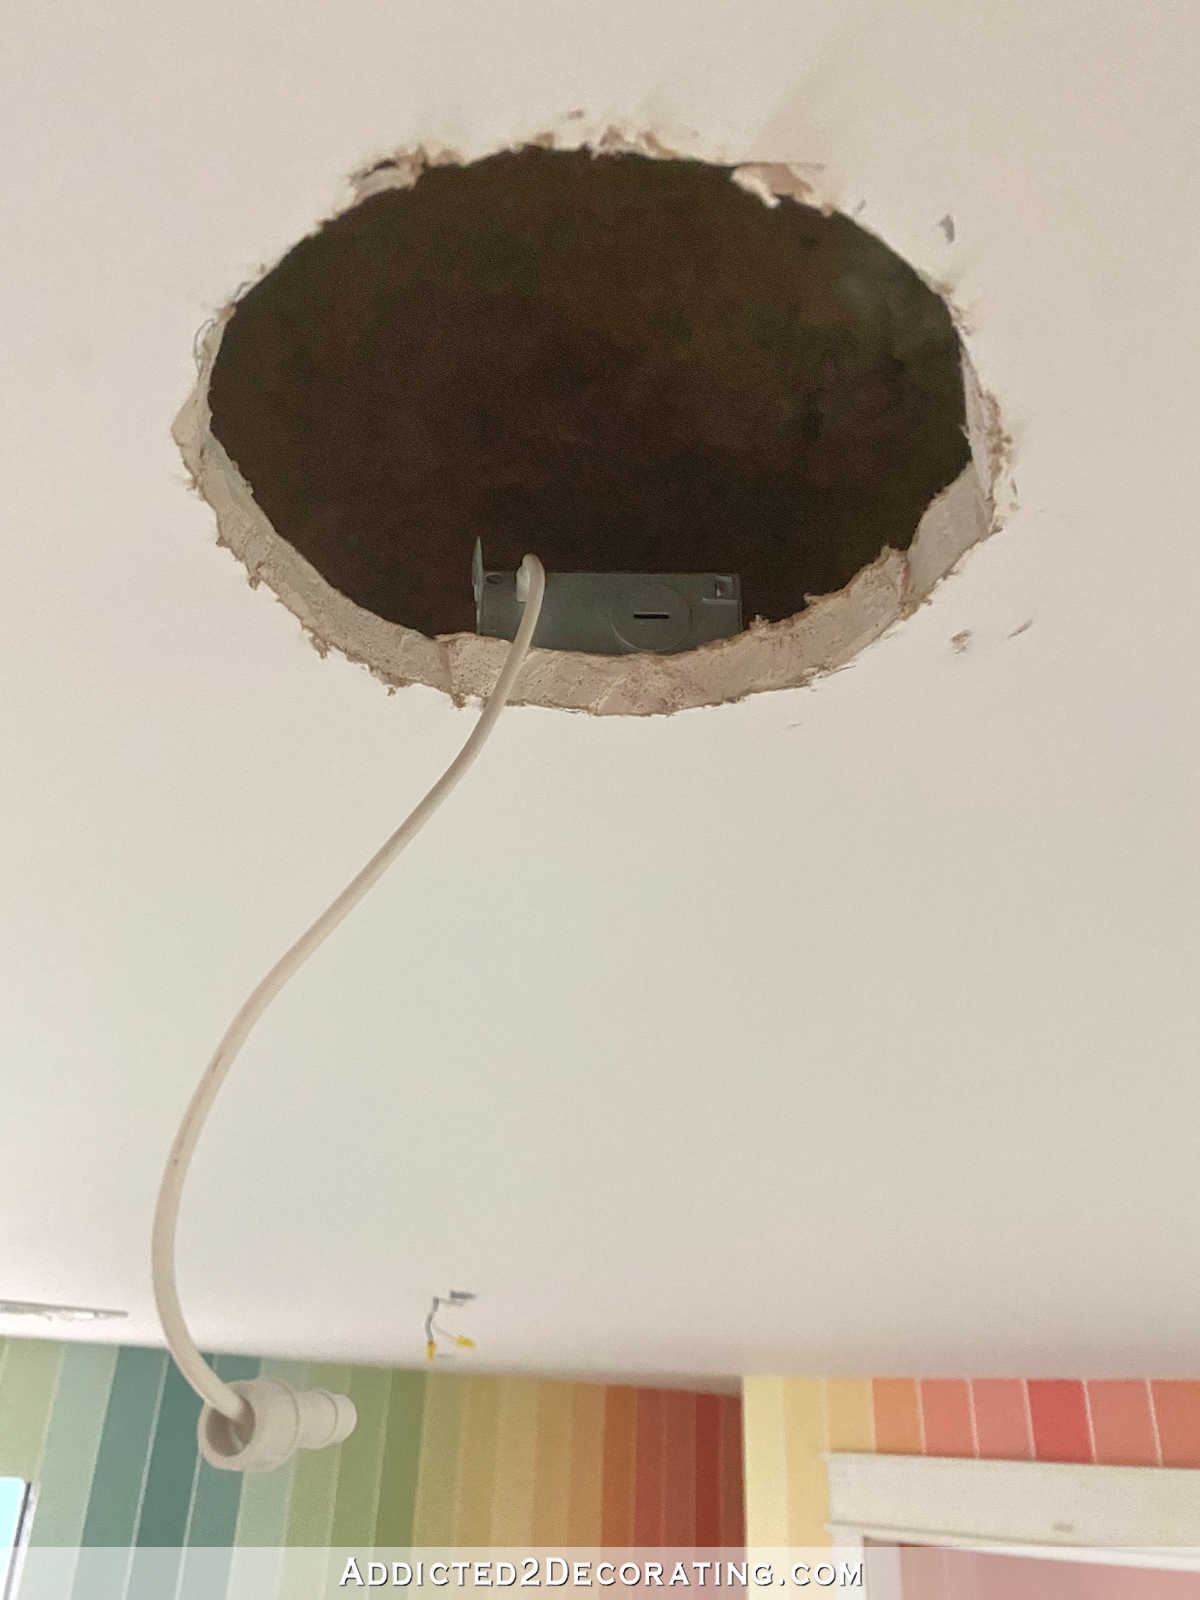 connection box for canless ultra thin recessed light sits on top of drywall in attic